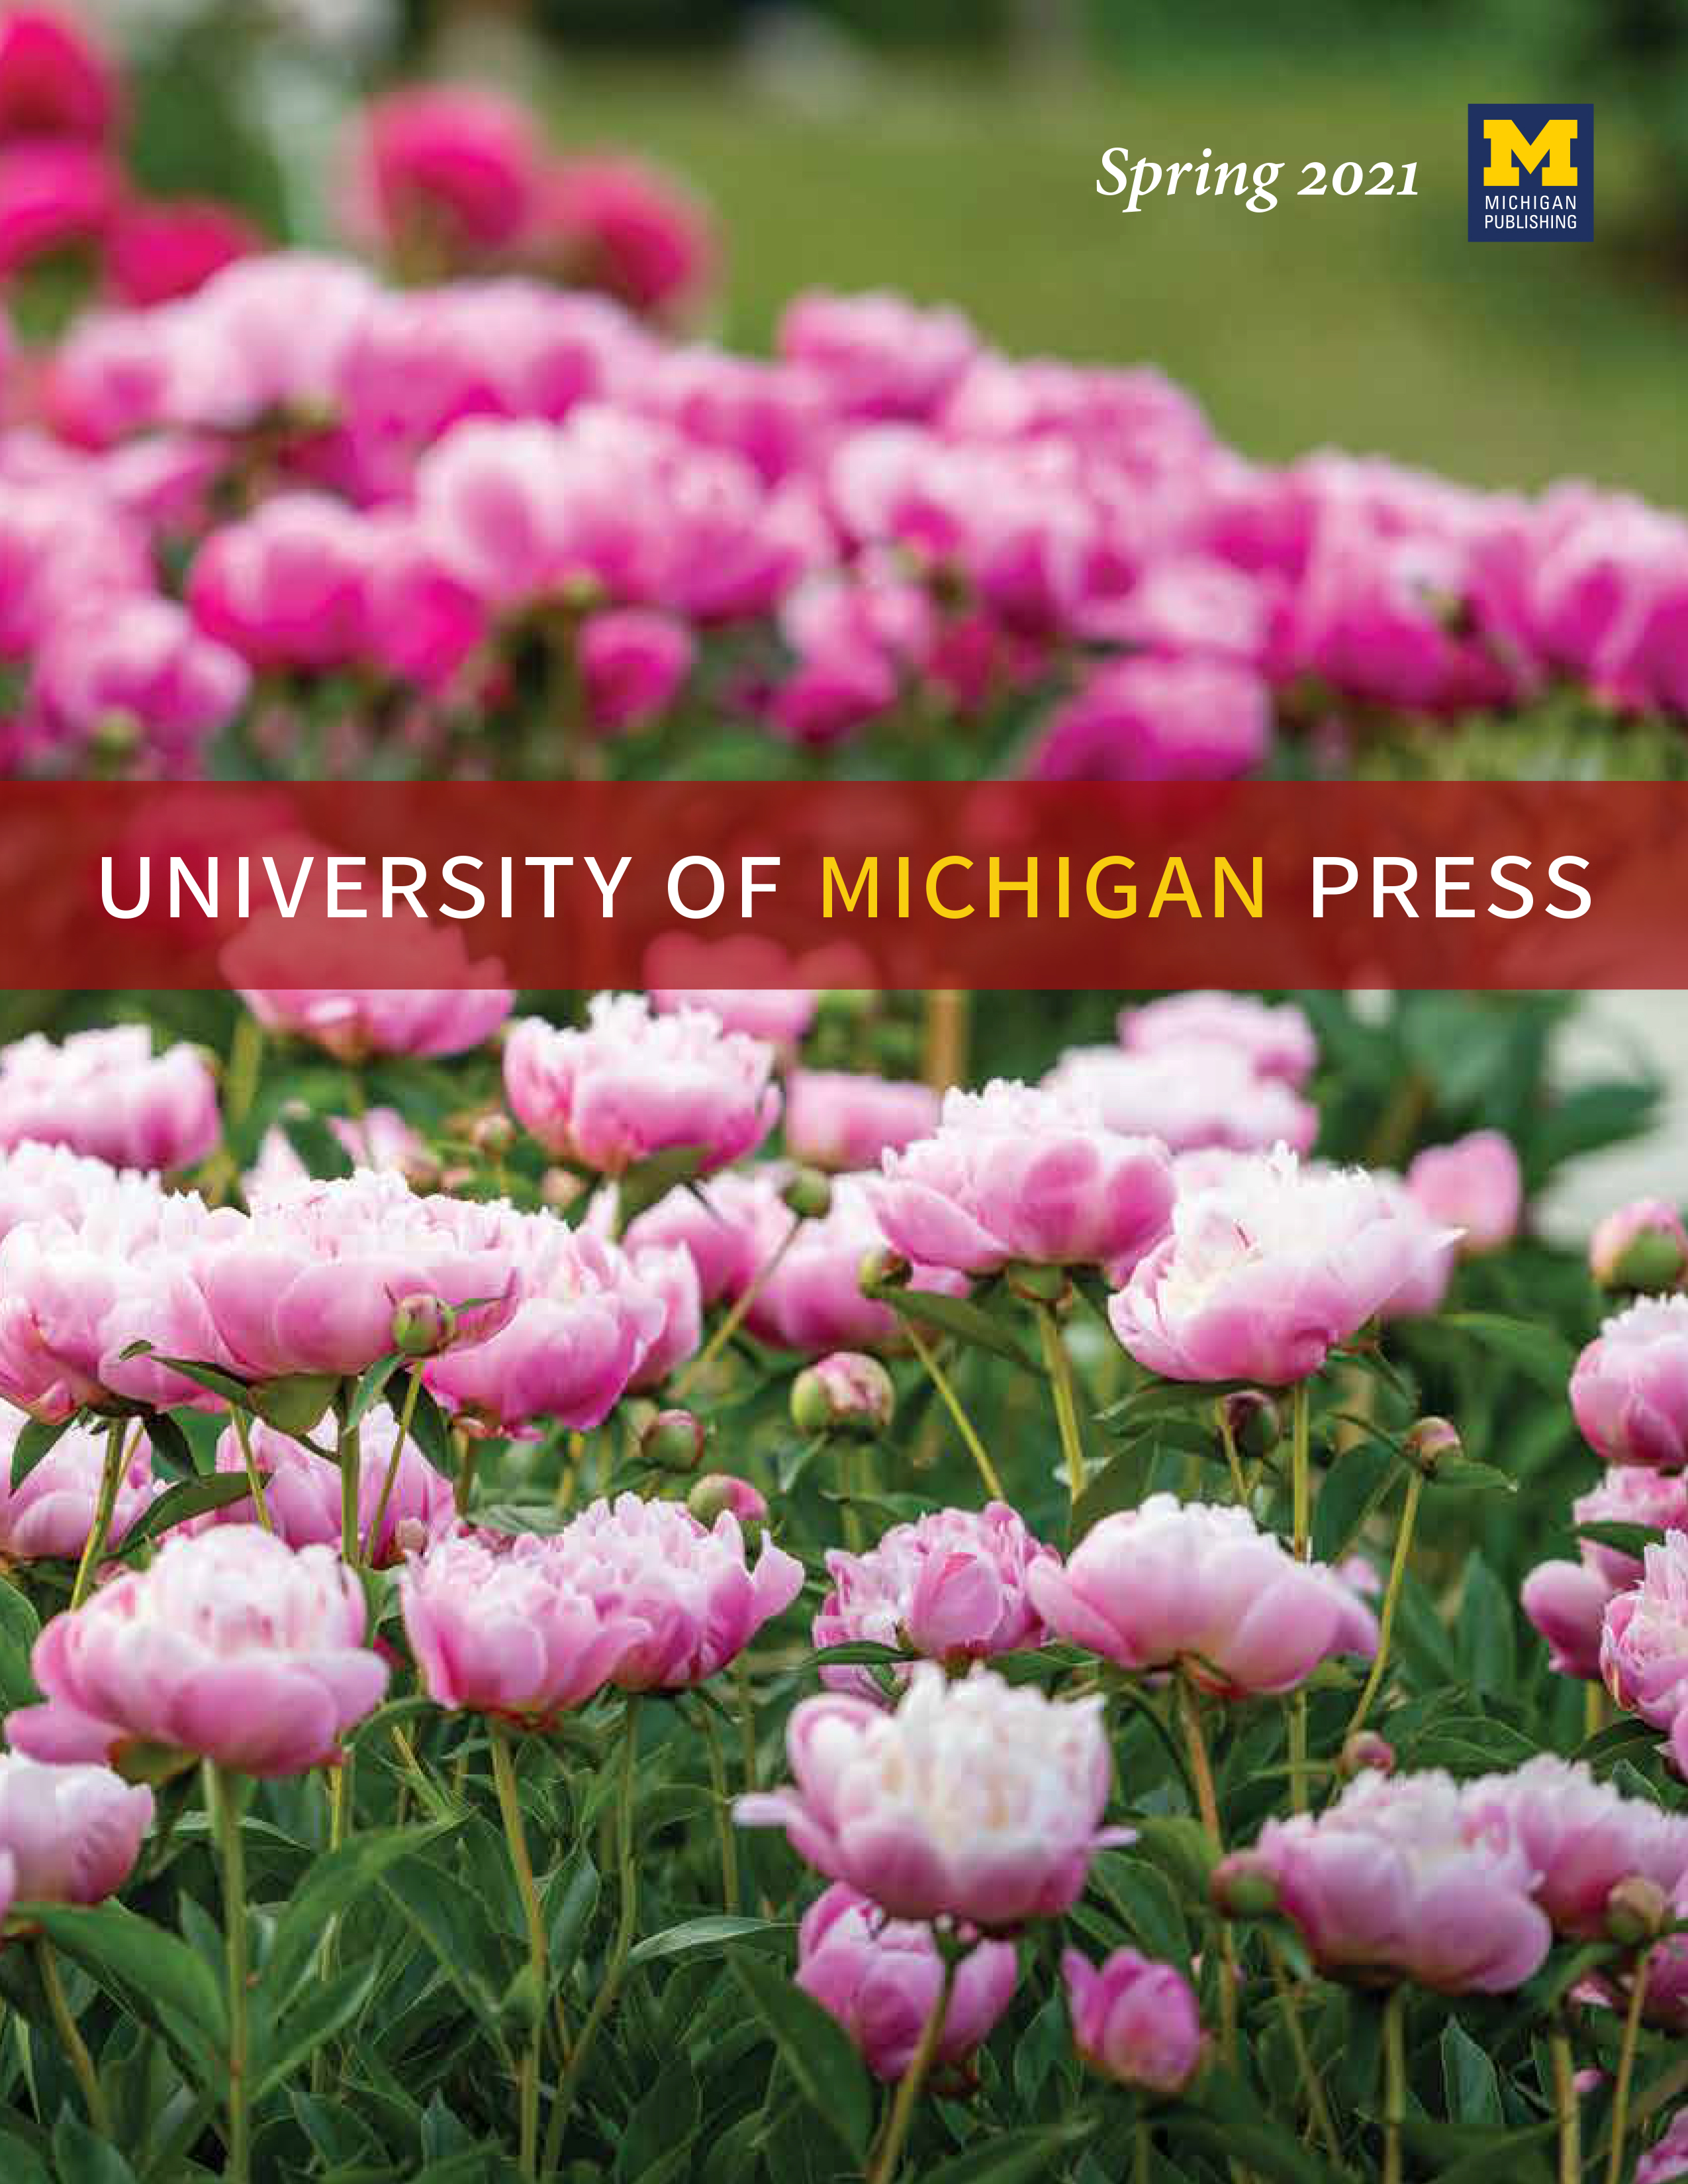 Photograph of pink peonies in green grass with "University of Michigan Press" written in white font in a red banner that runs across the photograph.